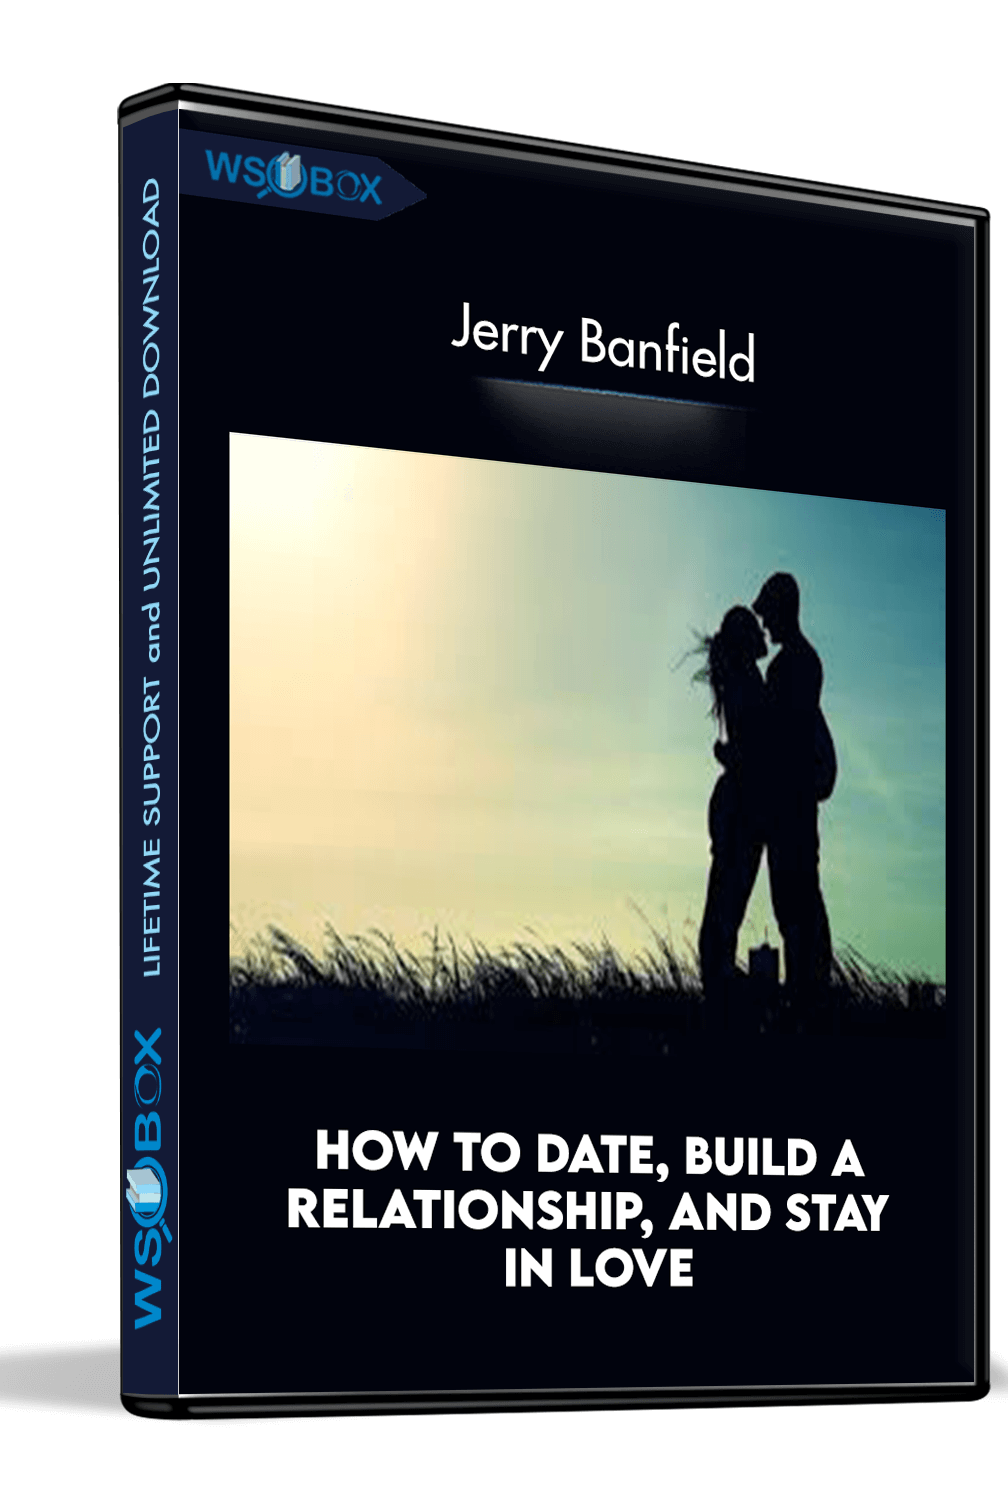 how-to-date-build-a-relationship-and-stay-in-love-jerry-banfield